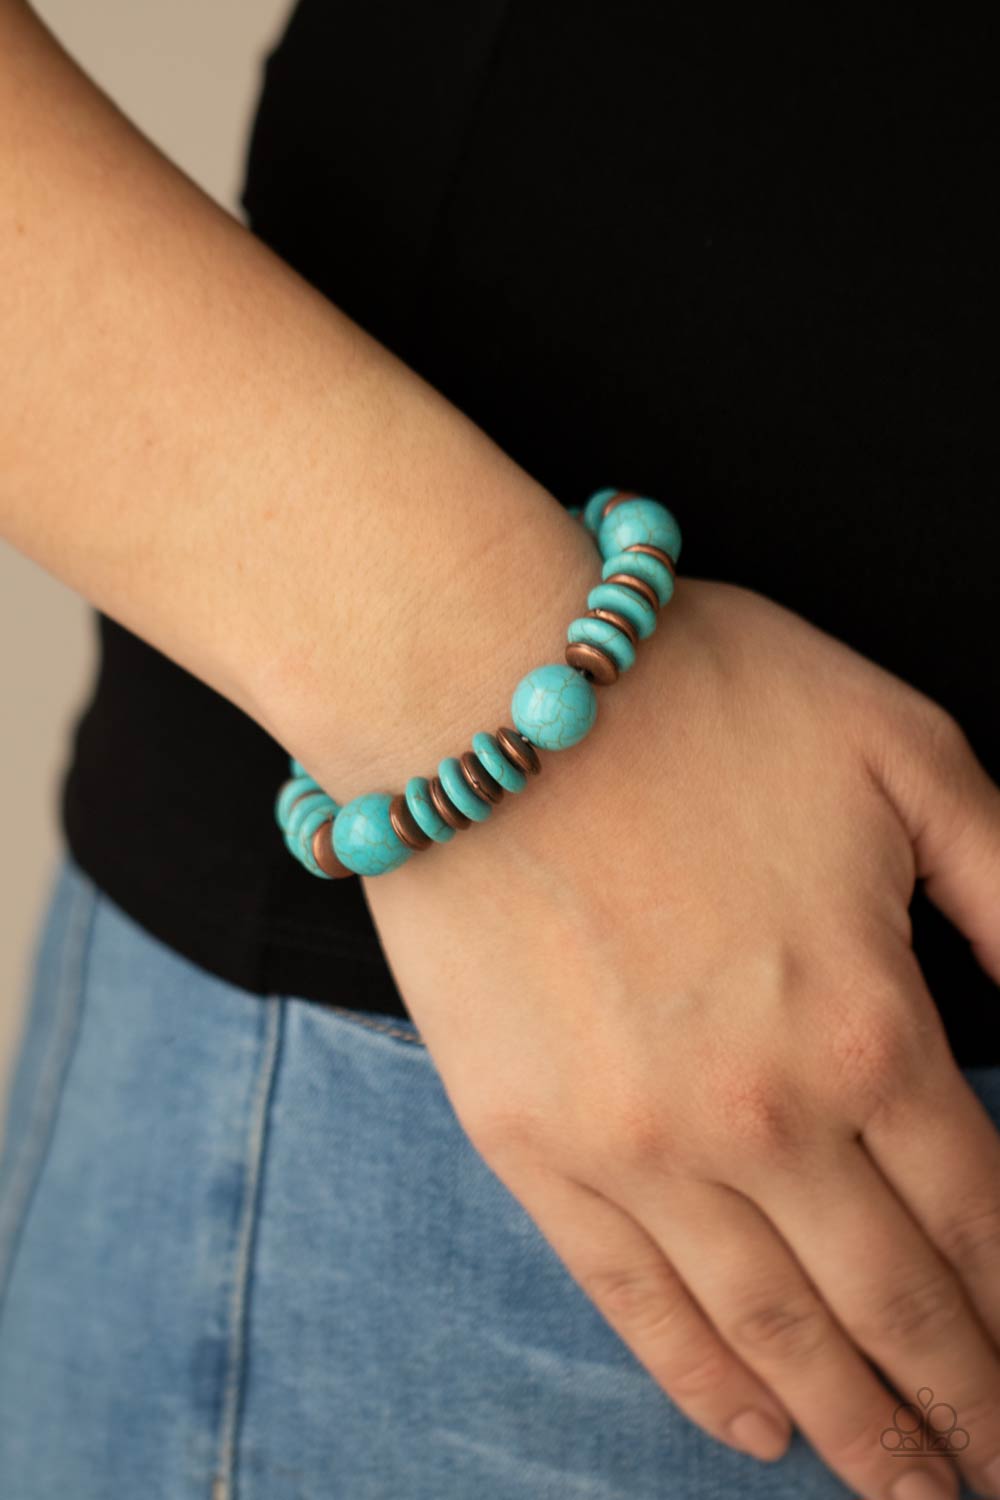 Rustic Rival Copper and Turquoise Stone Bracelet - Paparazzi Accessories- model - CarasShop.com - $5 Jewelry by Cara Jewels